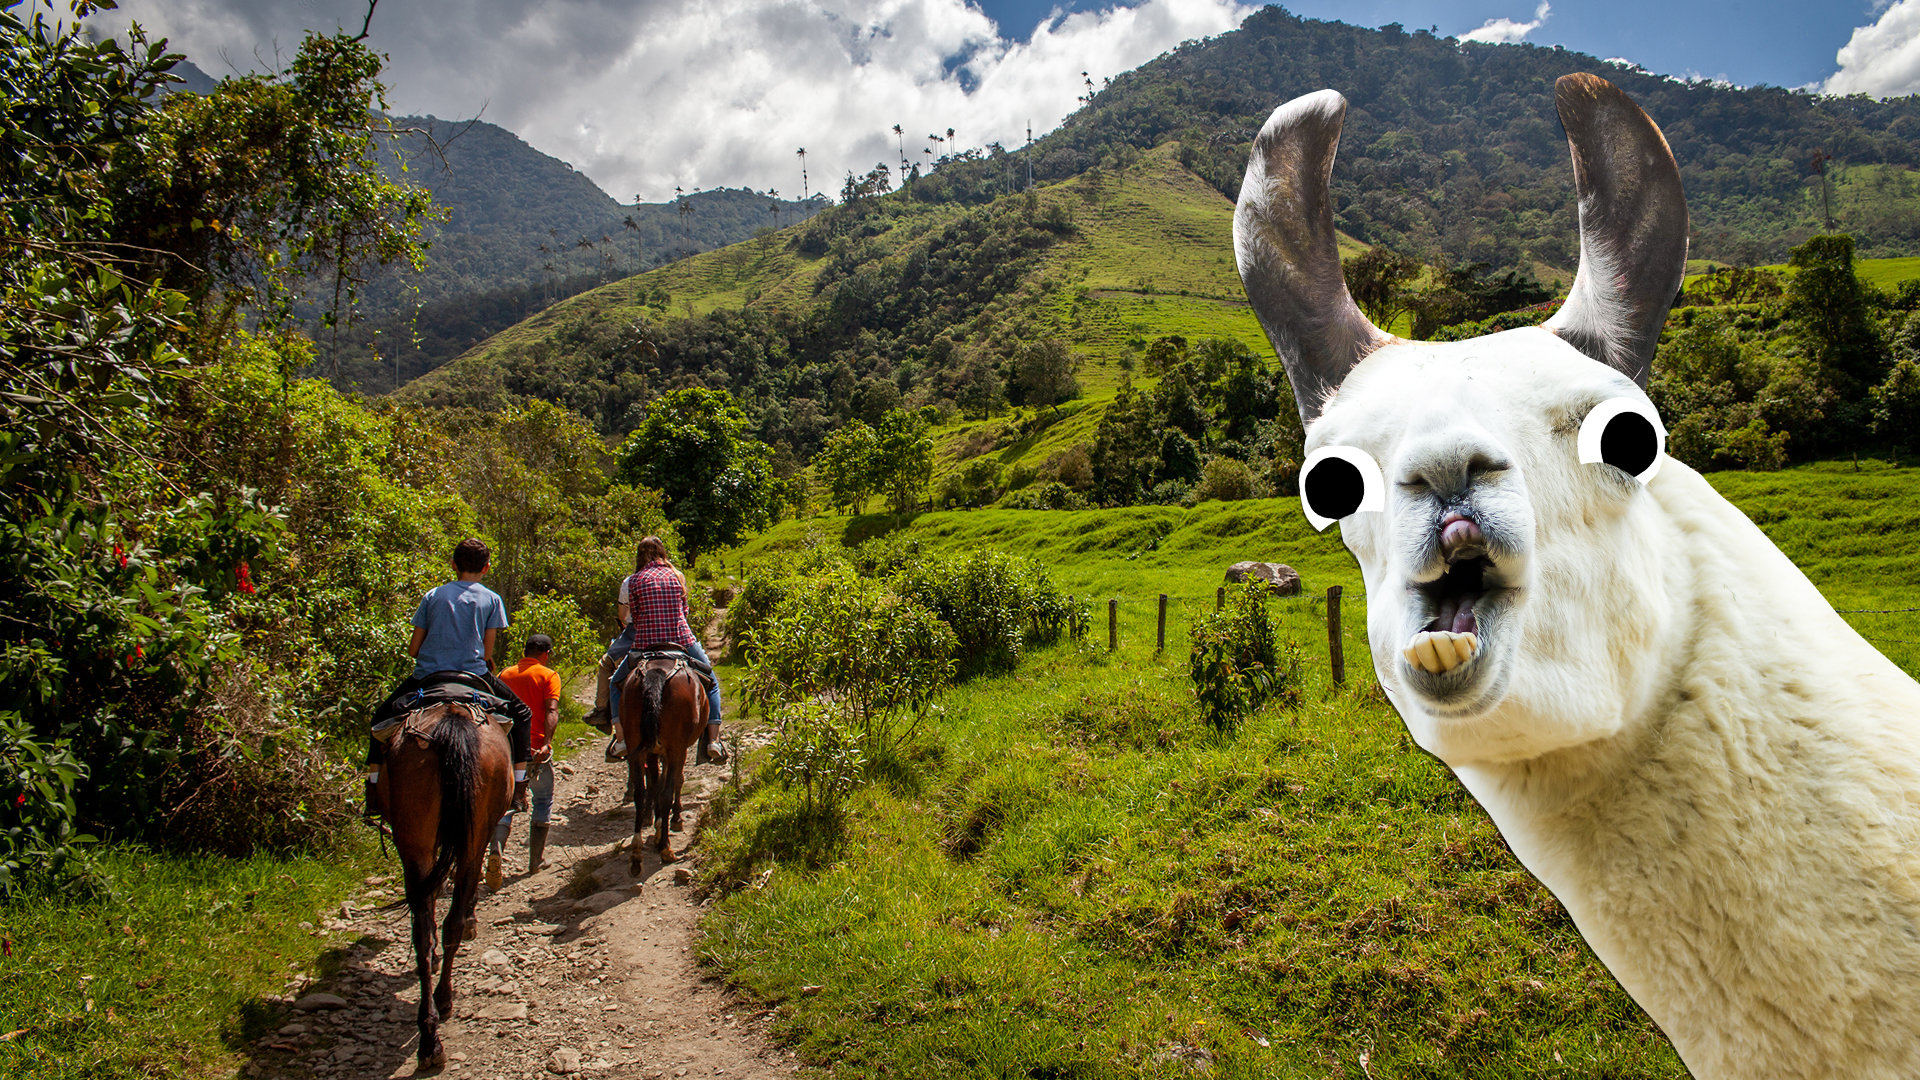 A llama in a South American country